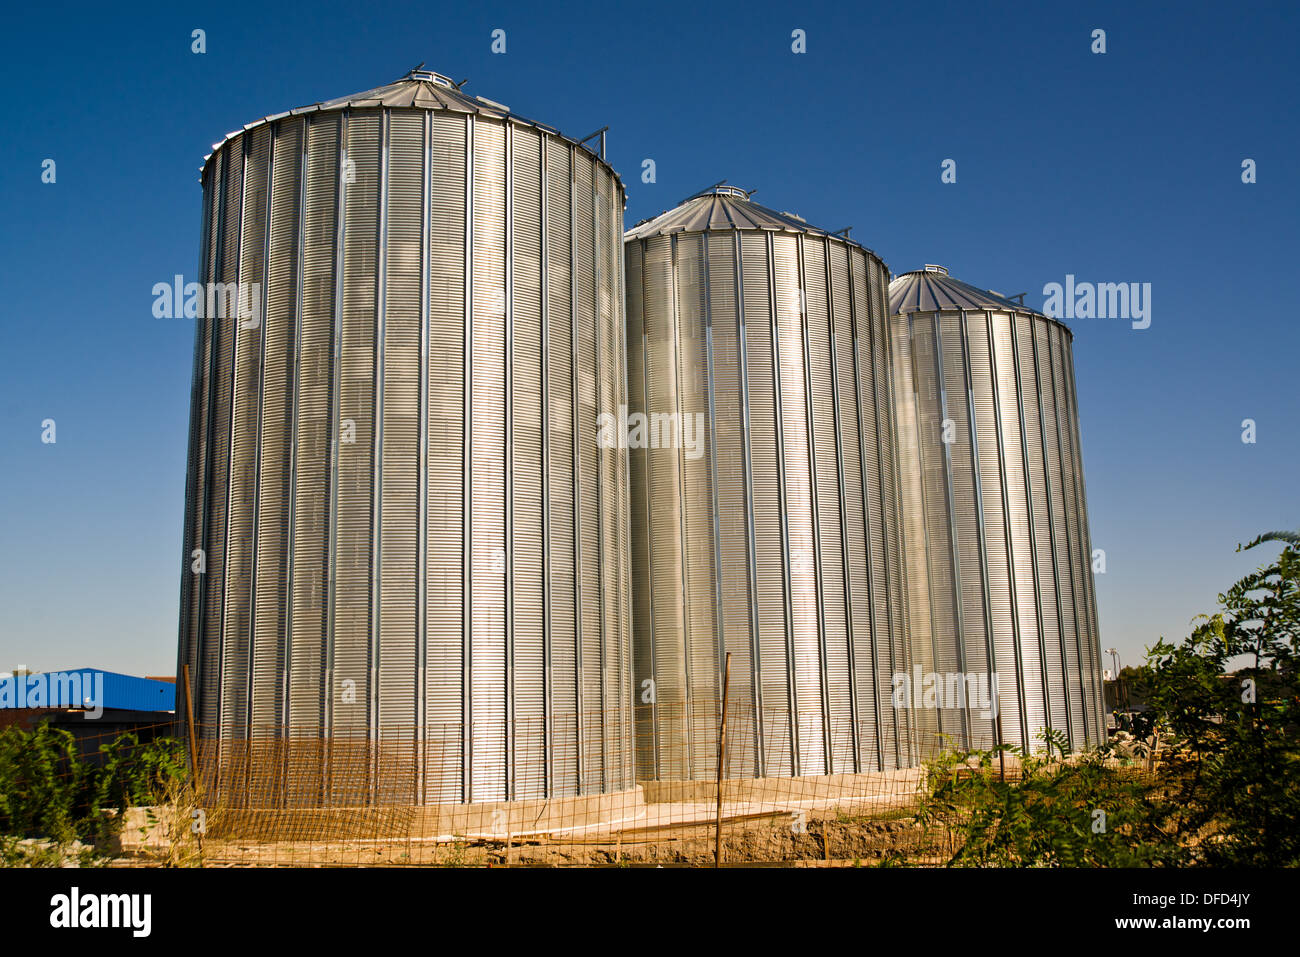 Grain silos construction site in finishing phase. Stock Photo